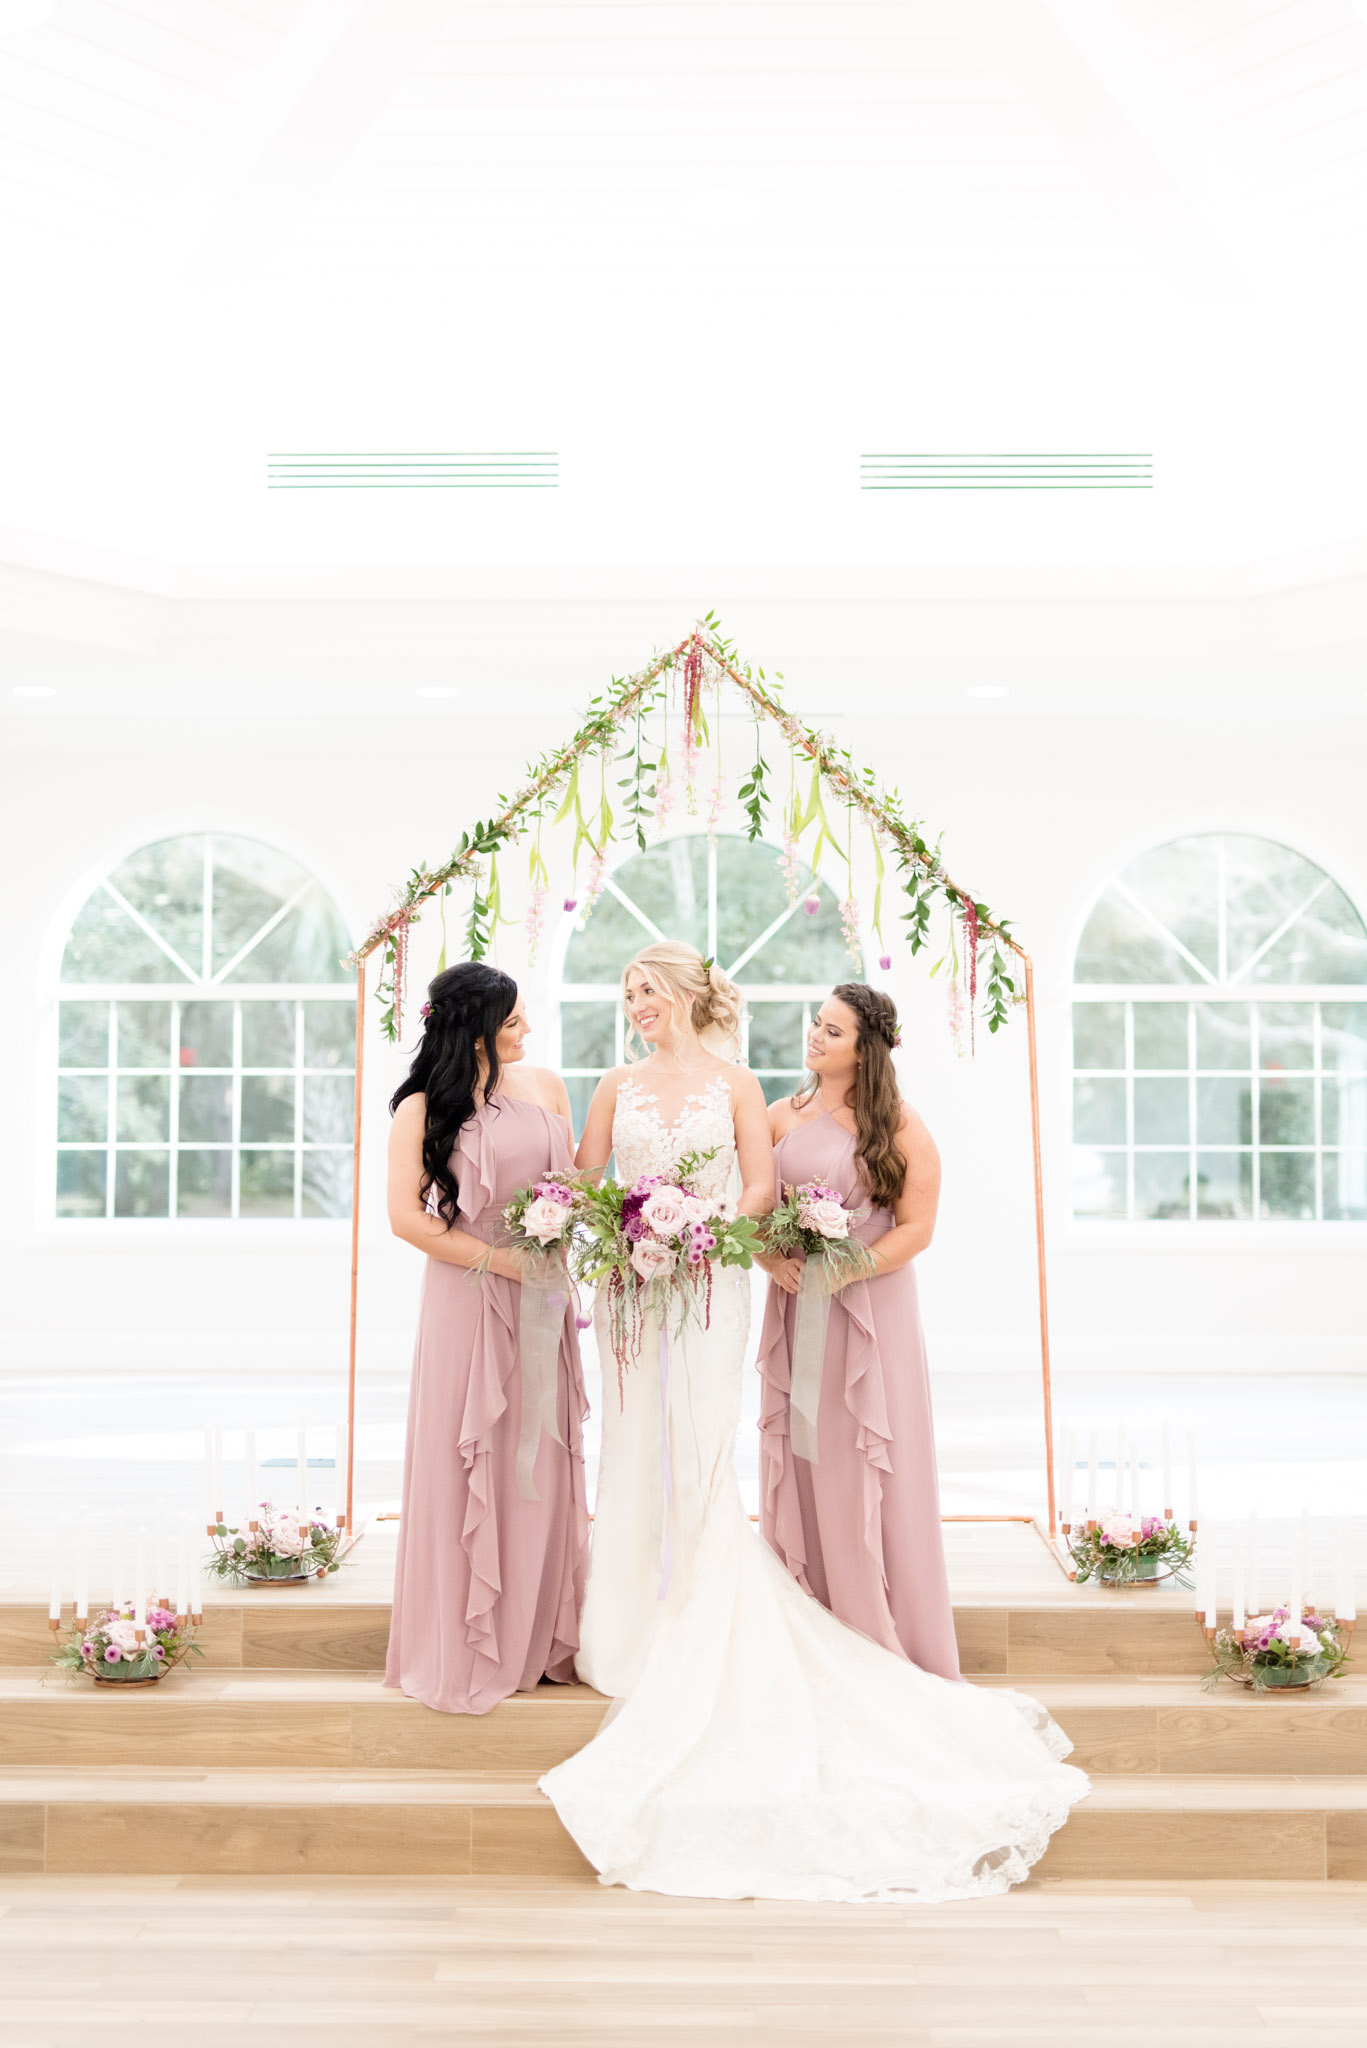 Bride and bridesmaid's laugh together.